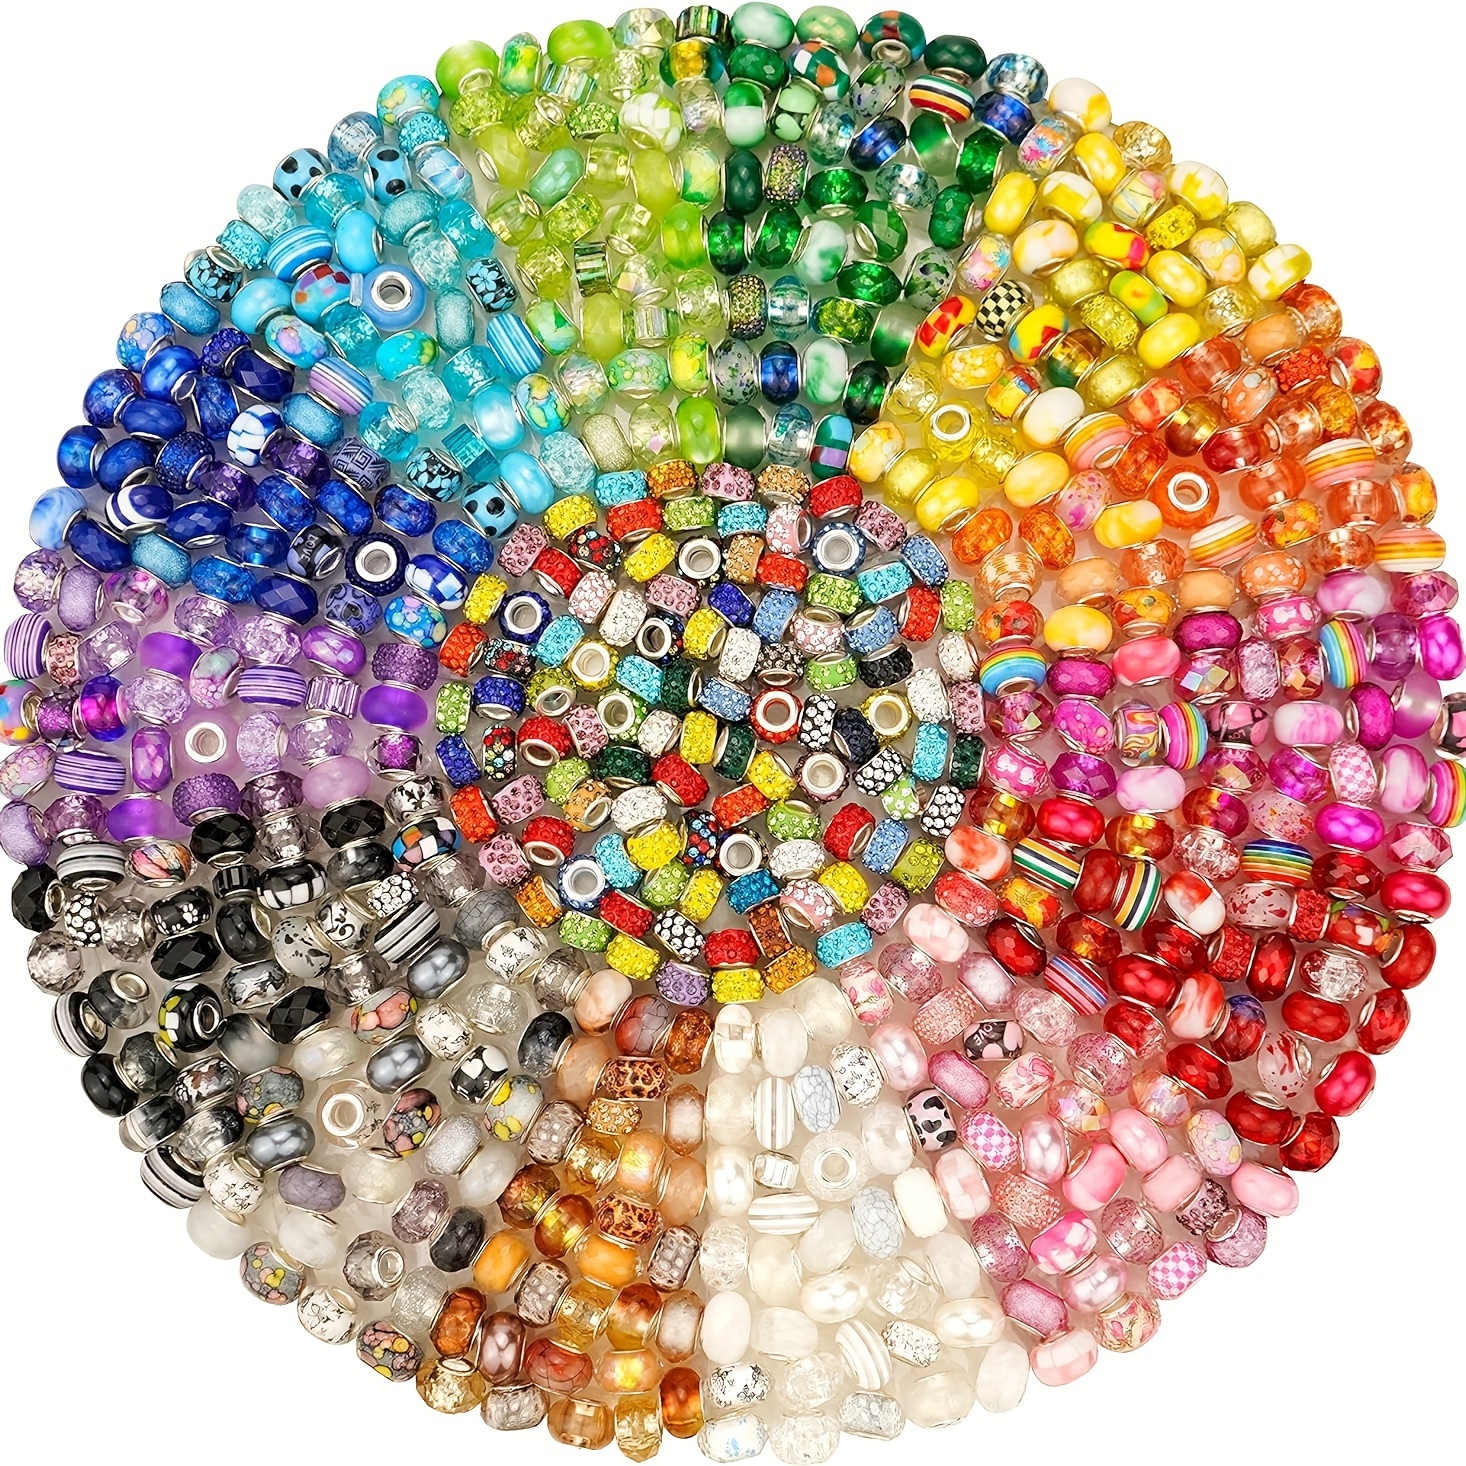 

Mixed Color Large Hole Glass Beads, Silvery-plated Spacer Beads For Diy Jewelry Making - Ideal For Bracelets & Necklaces Crafting Kit (30/40/50 Pcs)